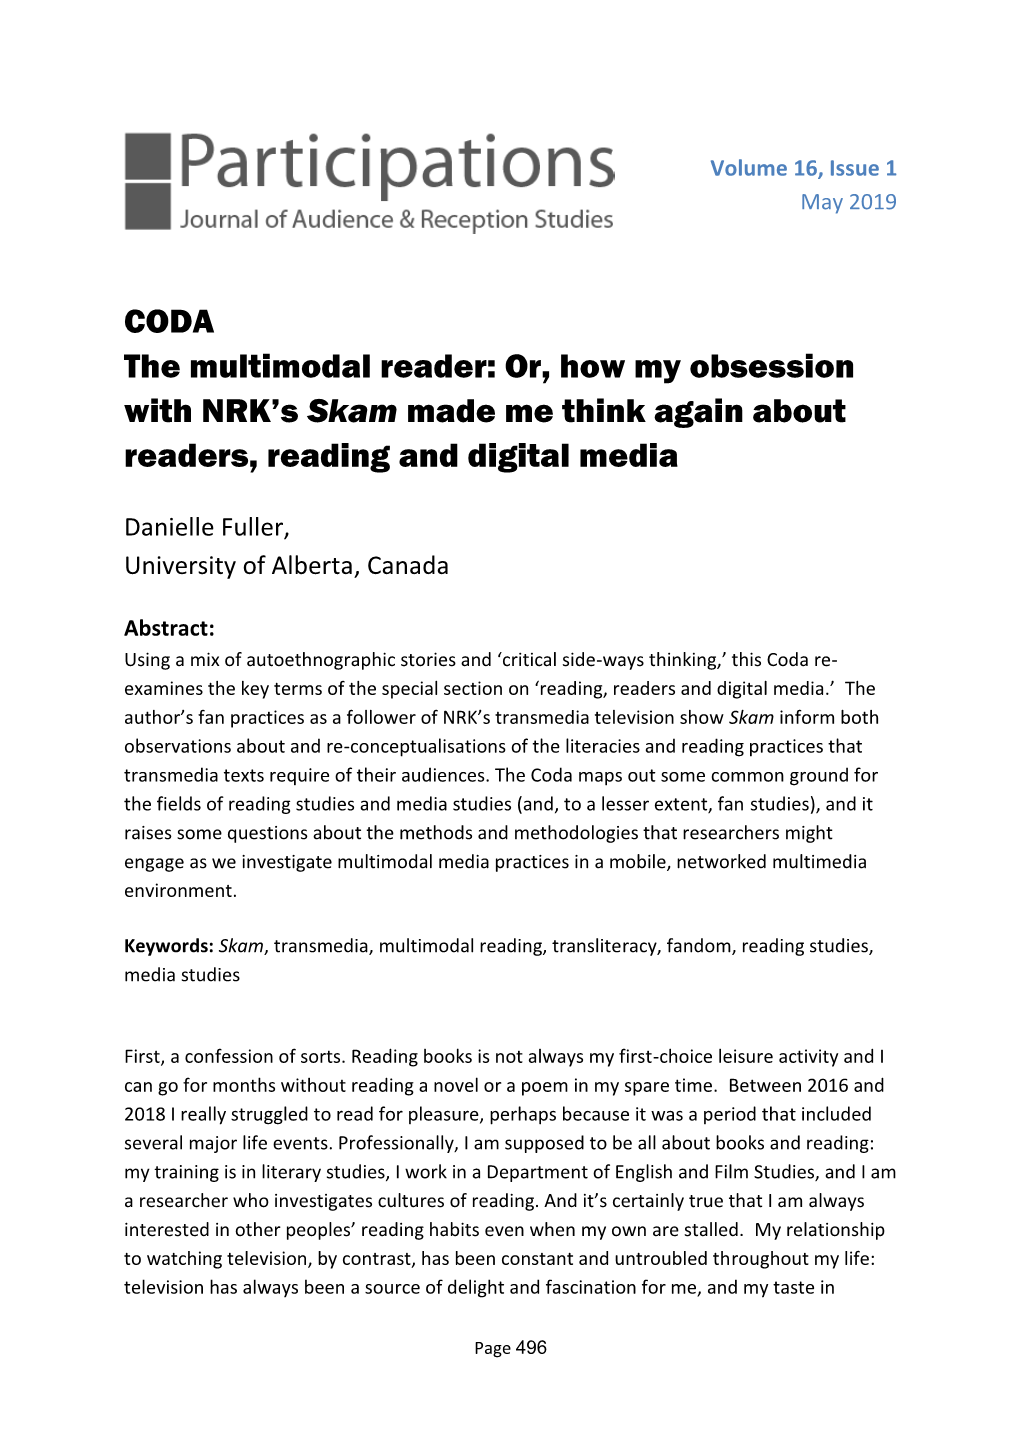 CODA the Multimodal Reader: Or, How My Obsession with NRK's Skam